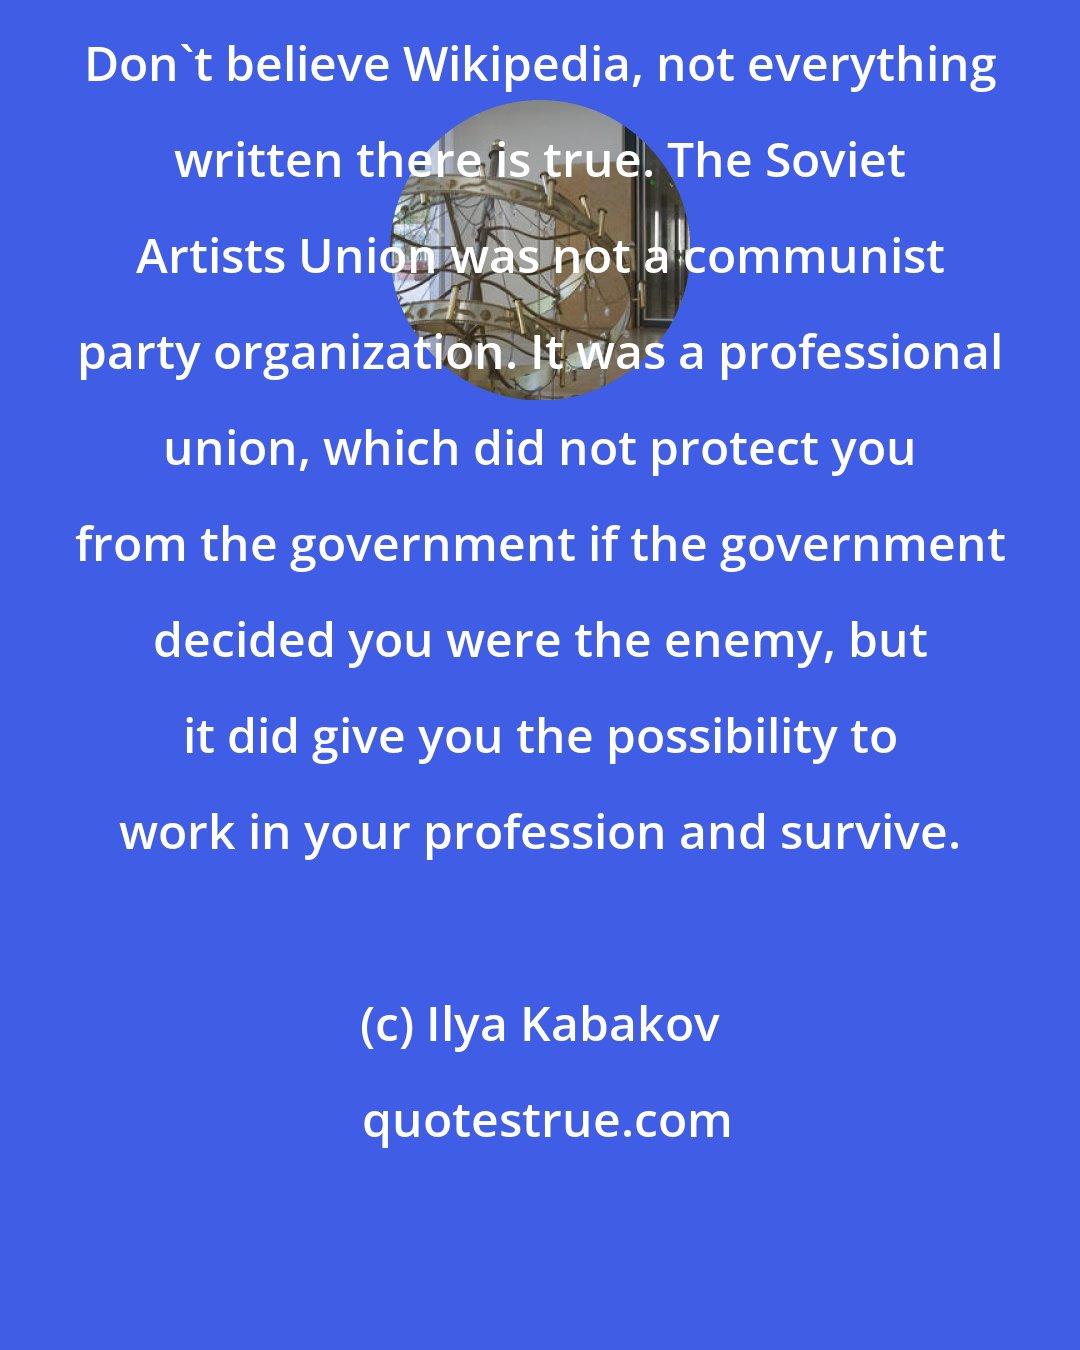 Ilya Kabakov: Don't believe Wikipedia, not everything written there is true. The Soviet Artists Union was not a communist party organization. It was a professional union, which did not protect you from the government if the government decided you were the enemy, but it did give you the possibility to work in your profession and survive.